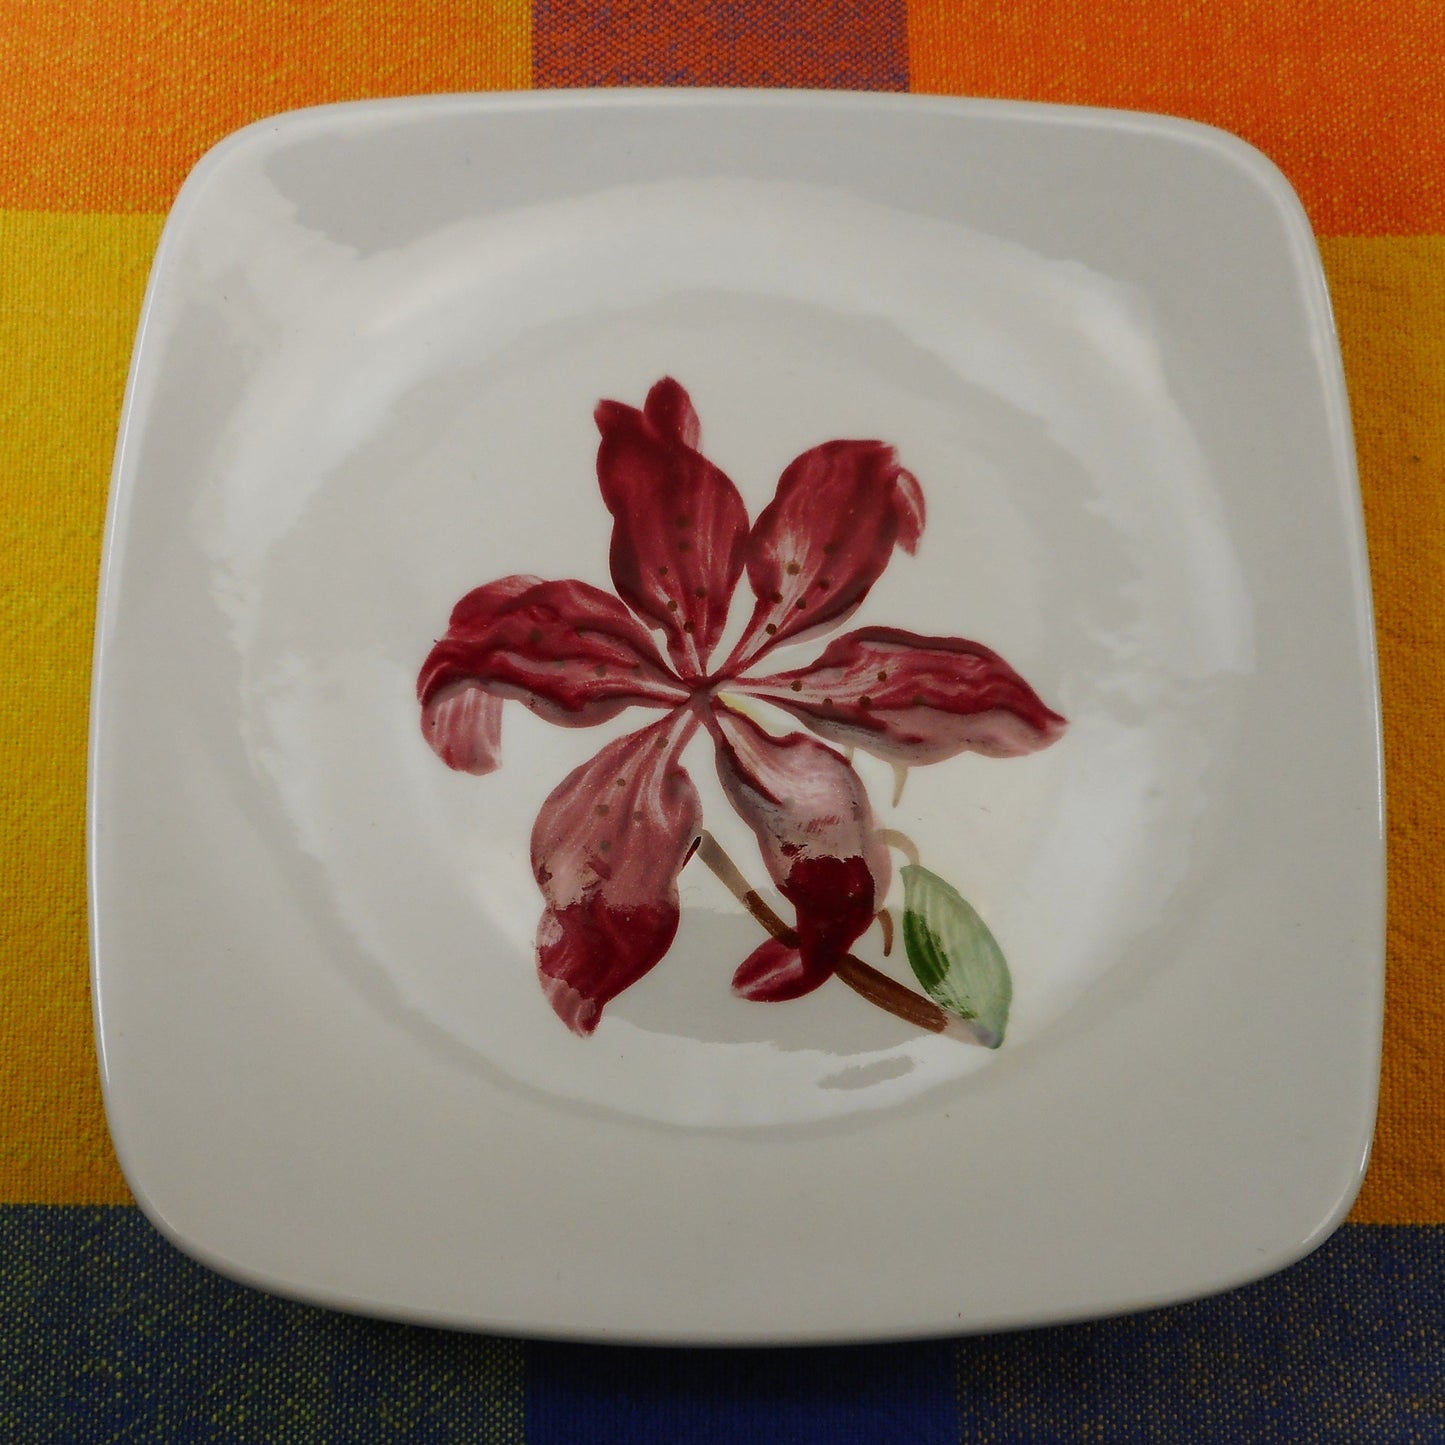 Orchard Ware California Pottery Red Lily Flower - Square Bread & Butter Plate 5-7/8"